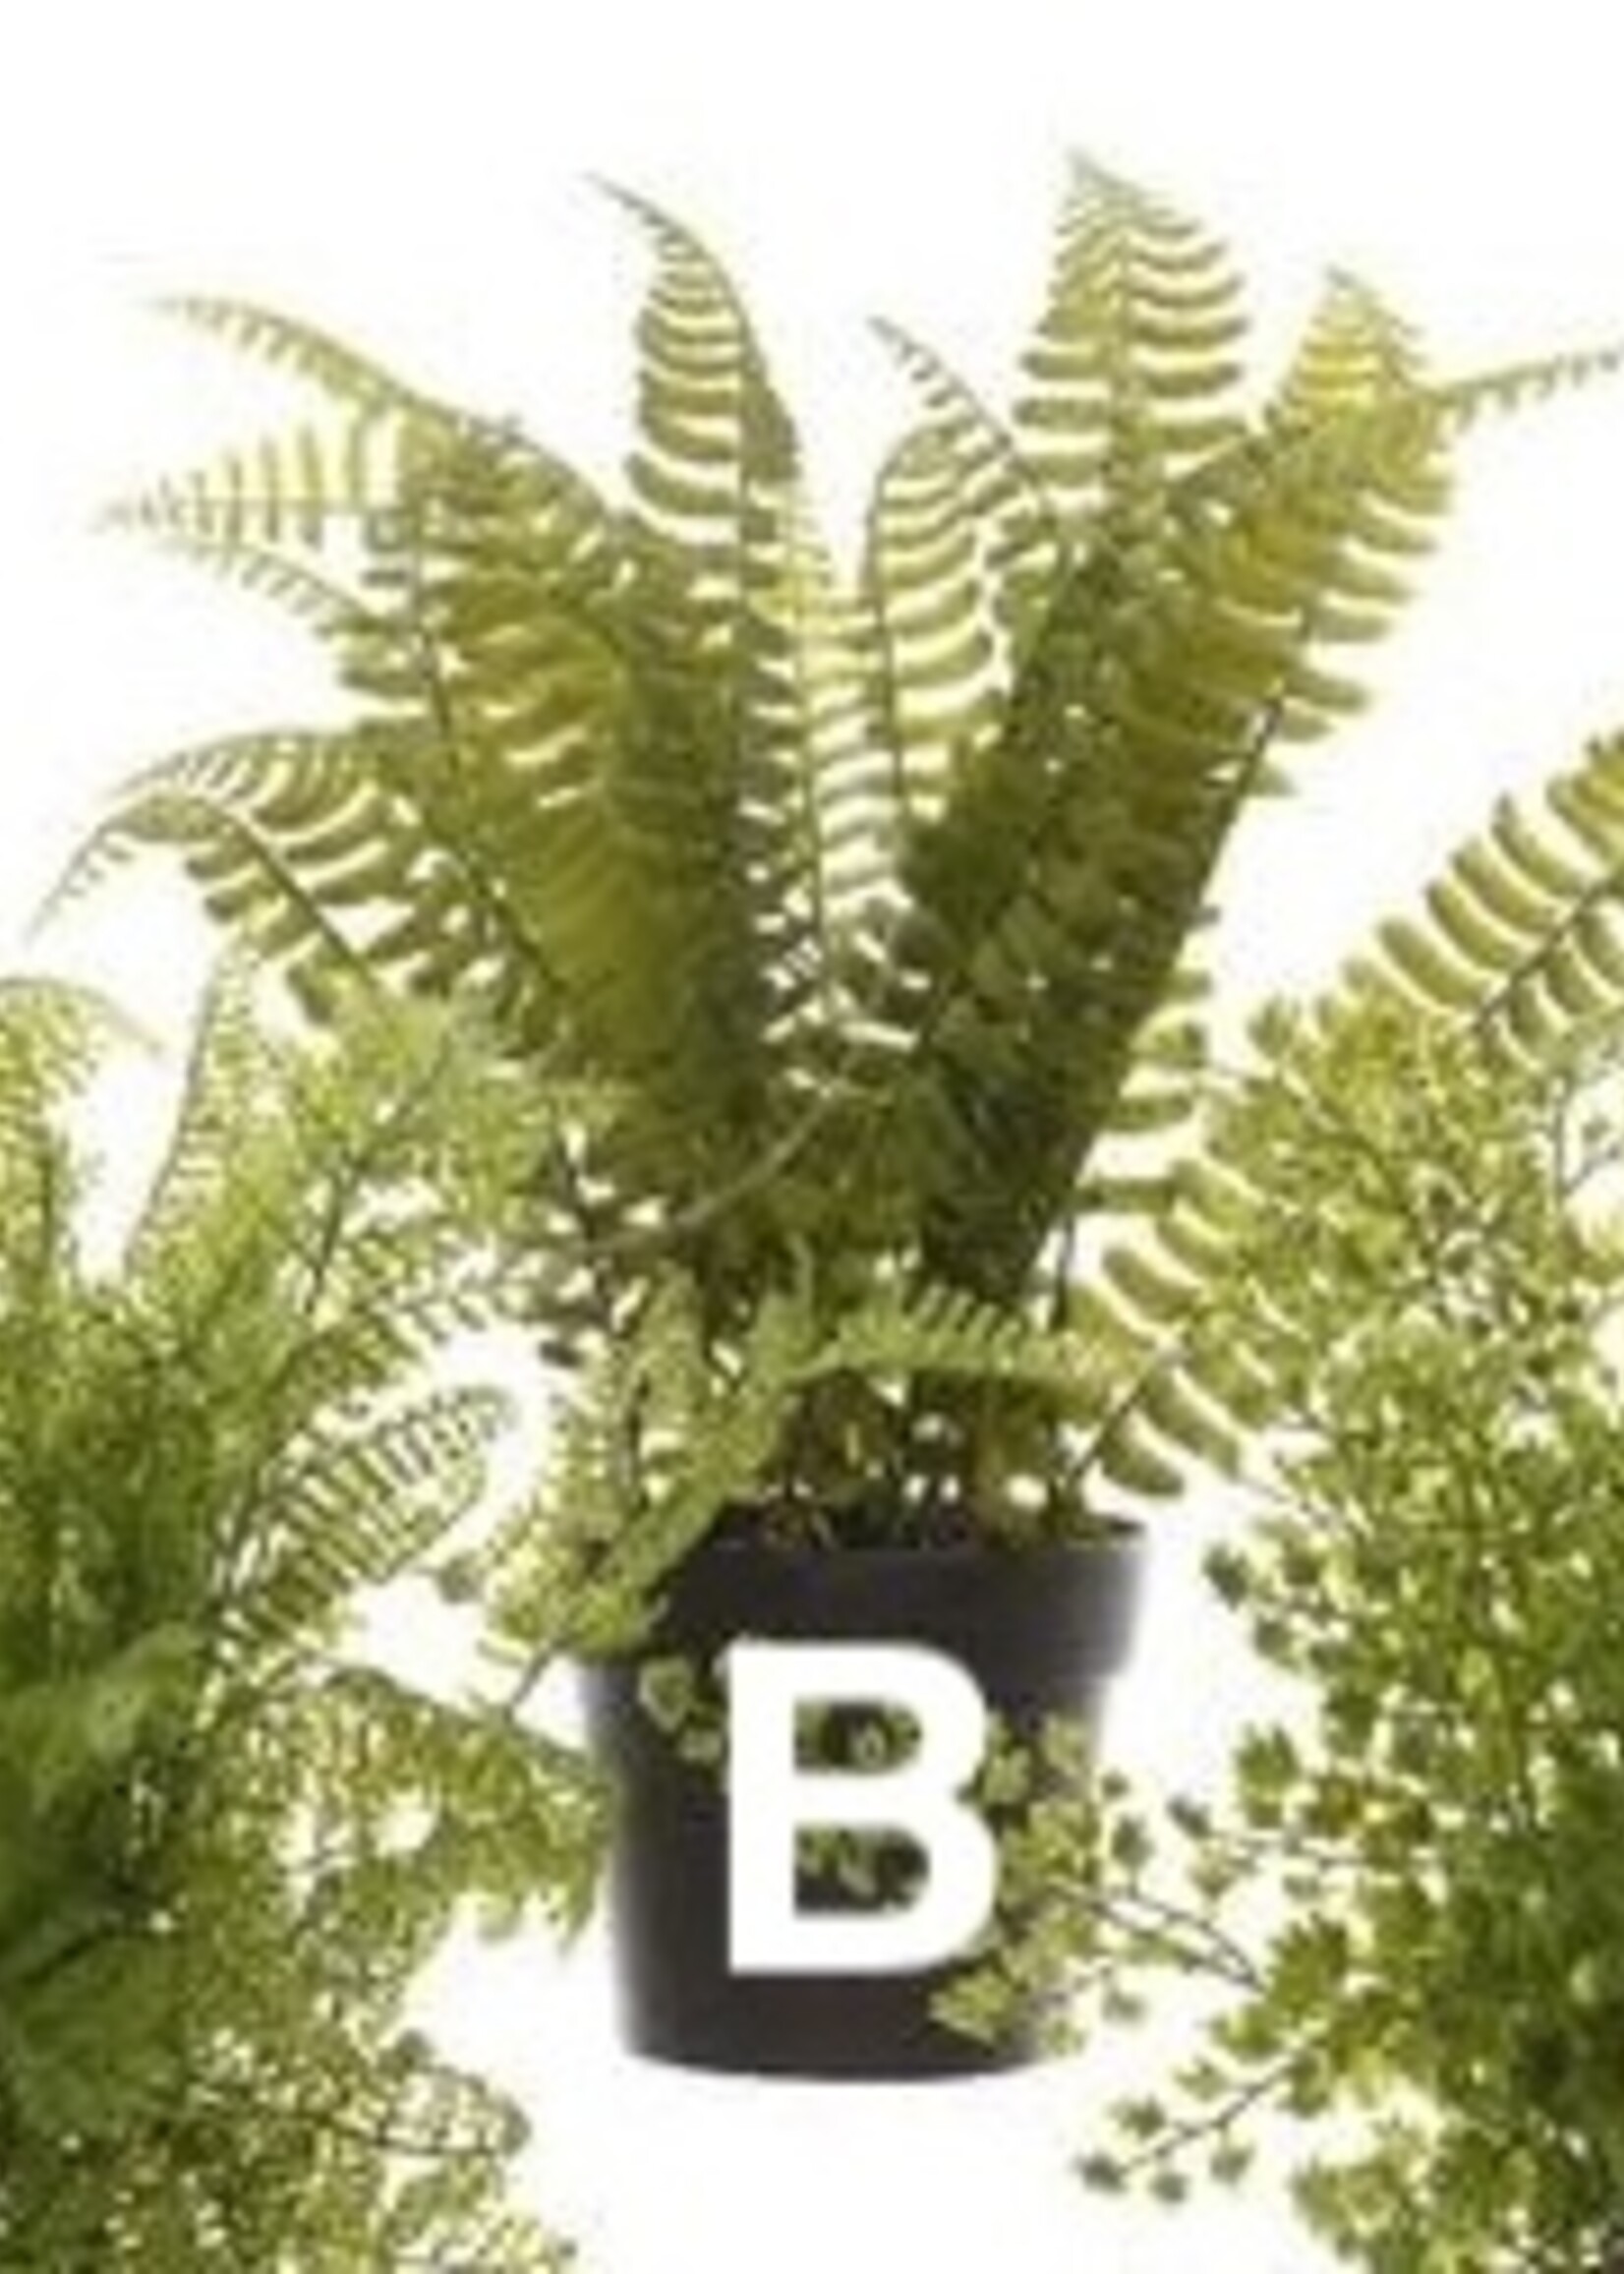 Kaemingk Fern Plant In Pot 10x28cm (3 Assorted - Price is for One)